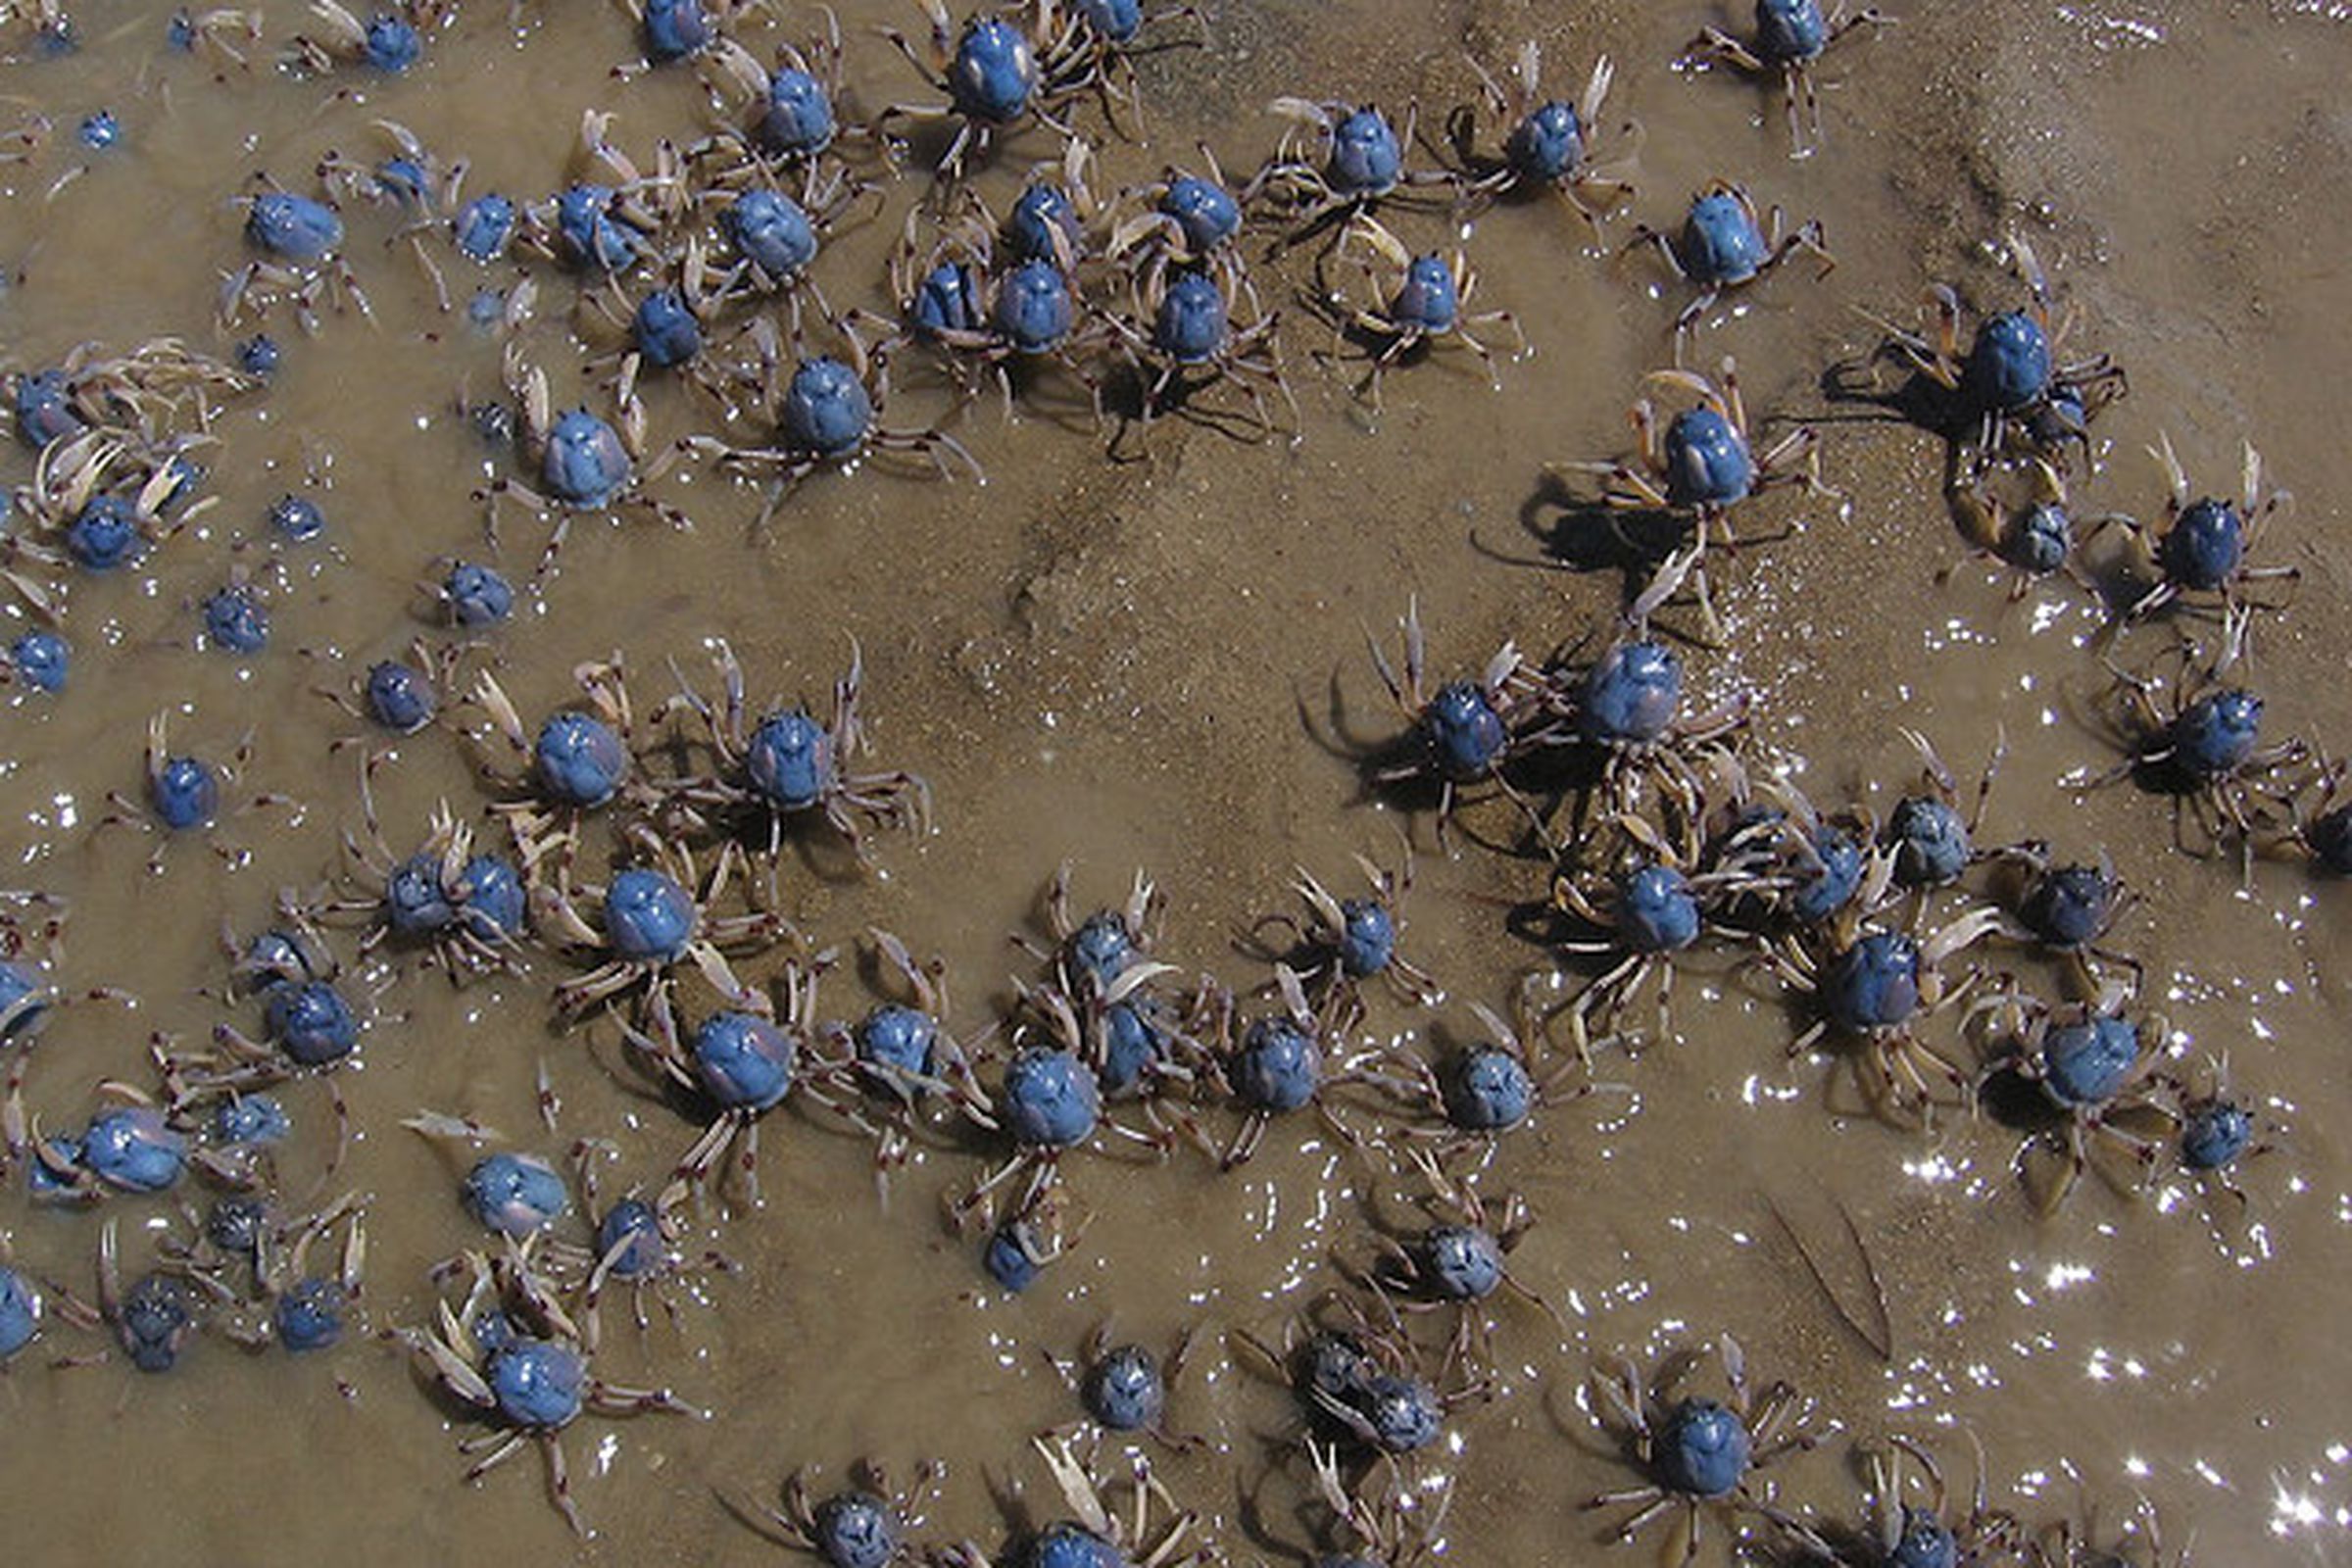 Soldier Crabs from Flickr